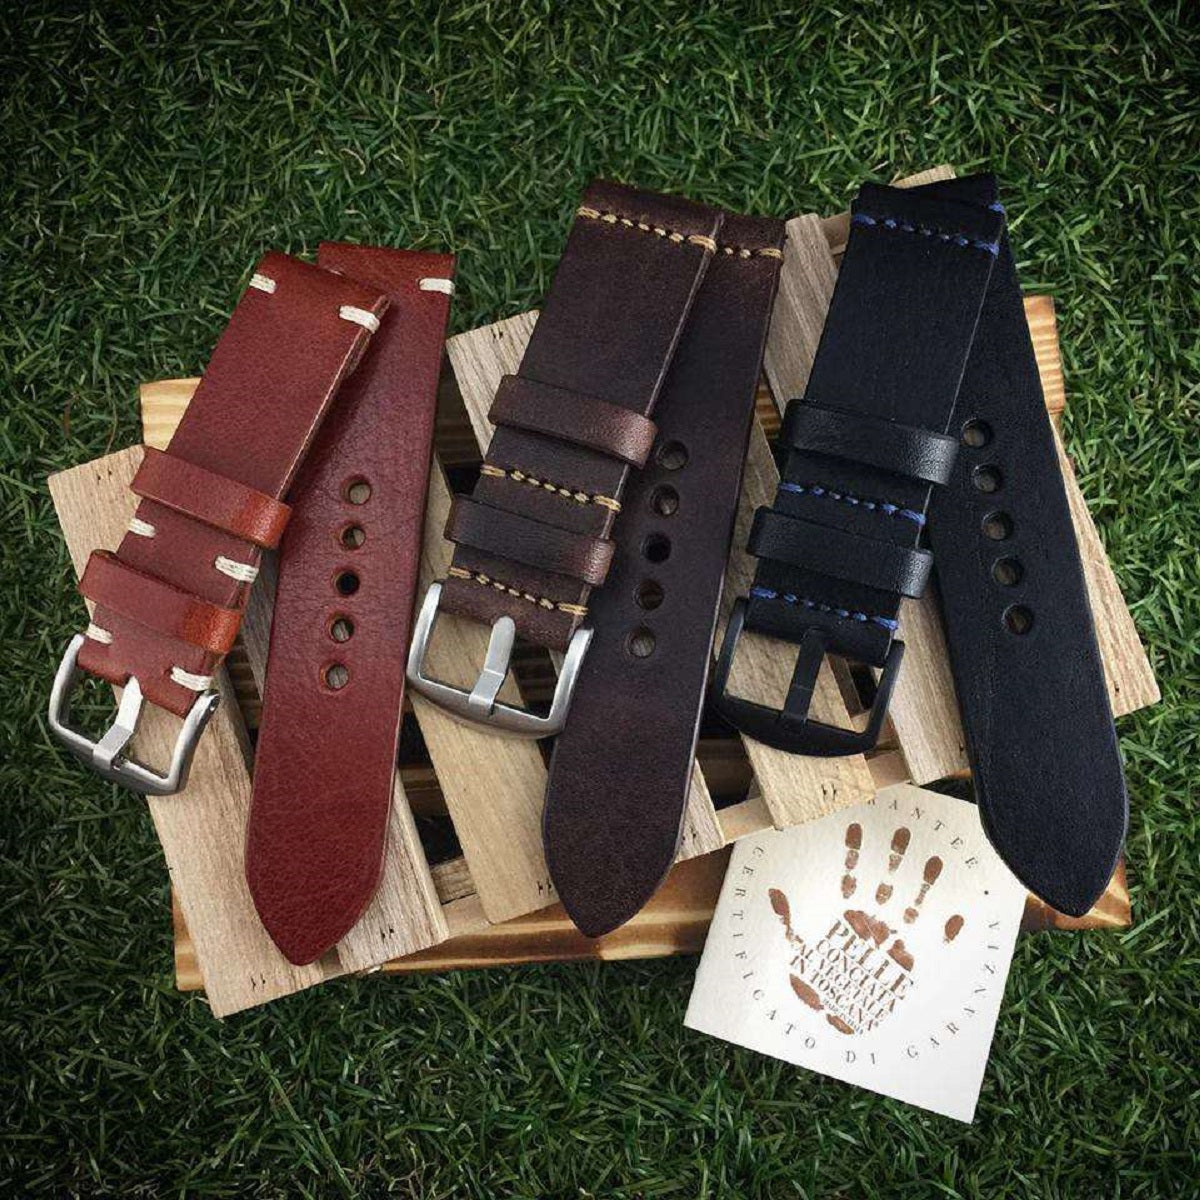 Minimalist 2-piece leather watch straps, handcrafted by Cozy Handmade | Full Grain Italian Veg-Tanned